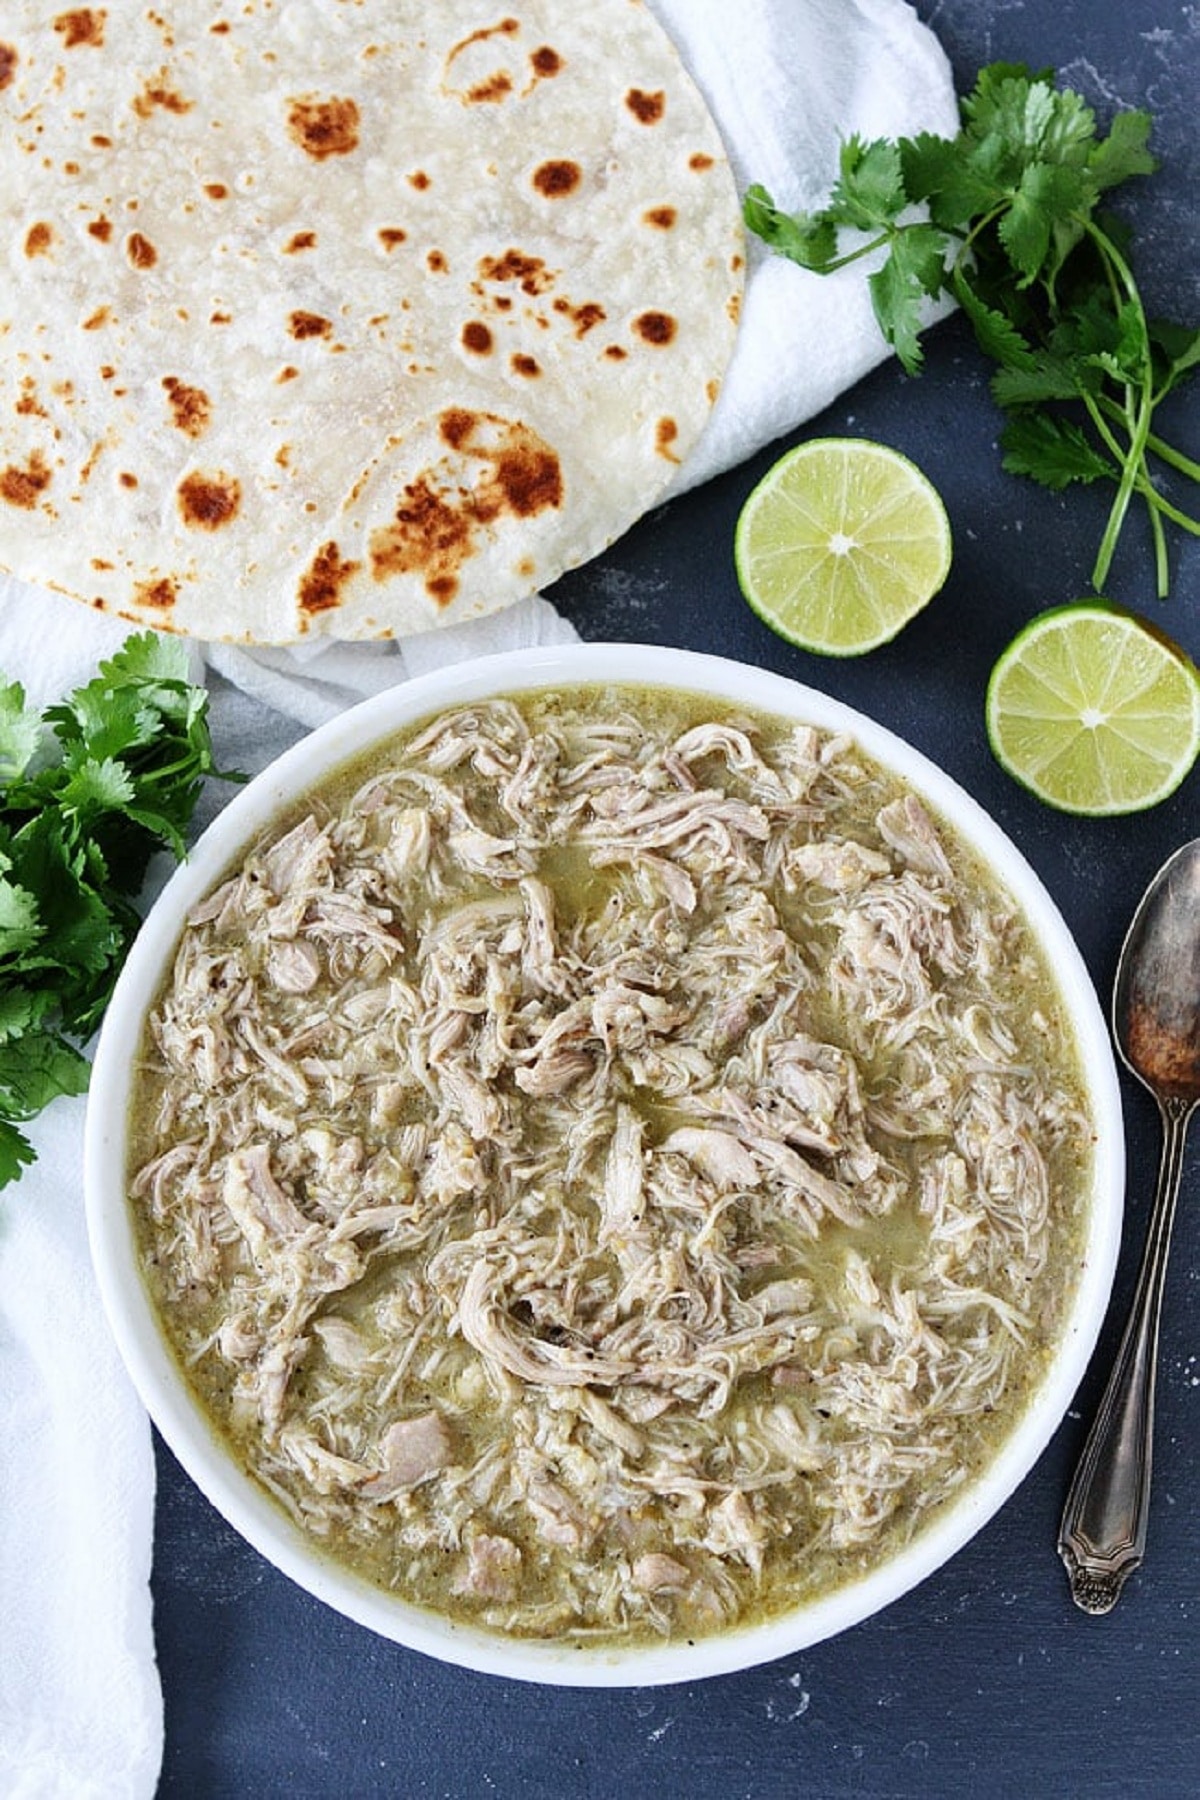 Instant pot chicken chile verde served with pita and coriander on the side